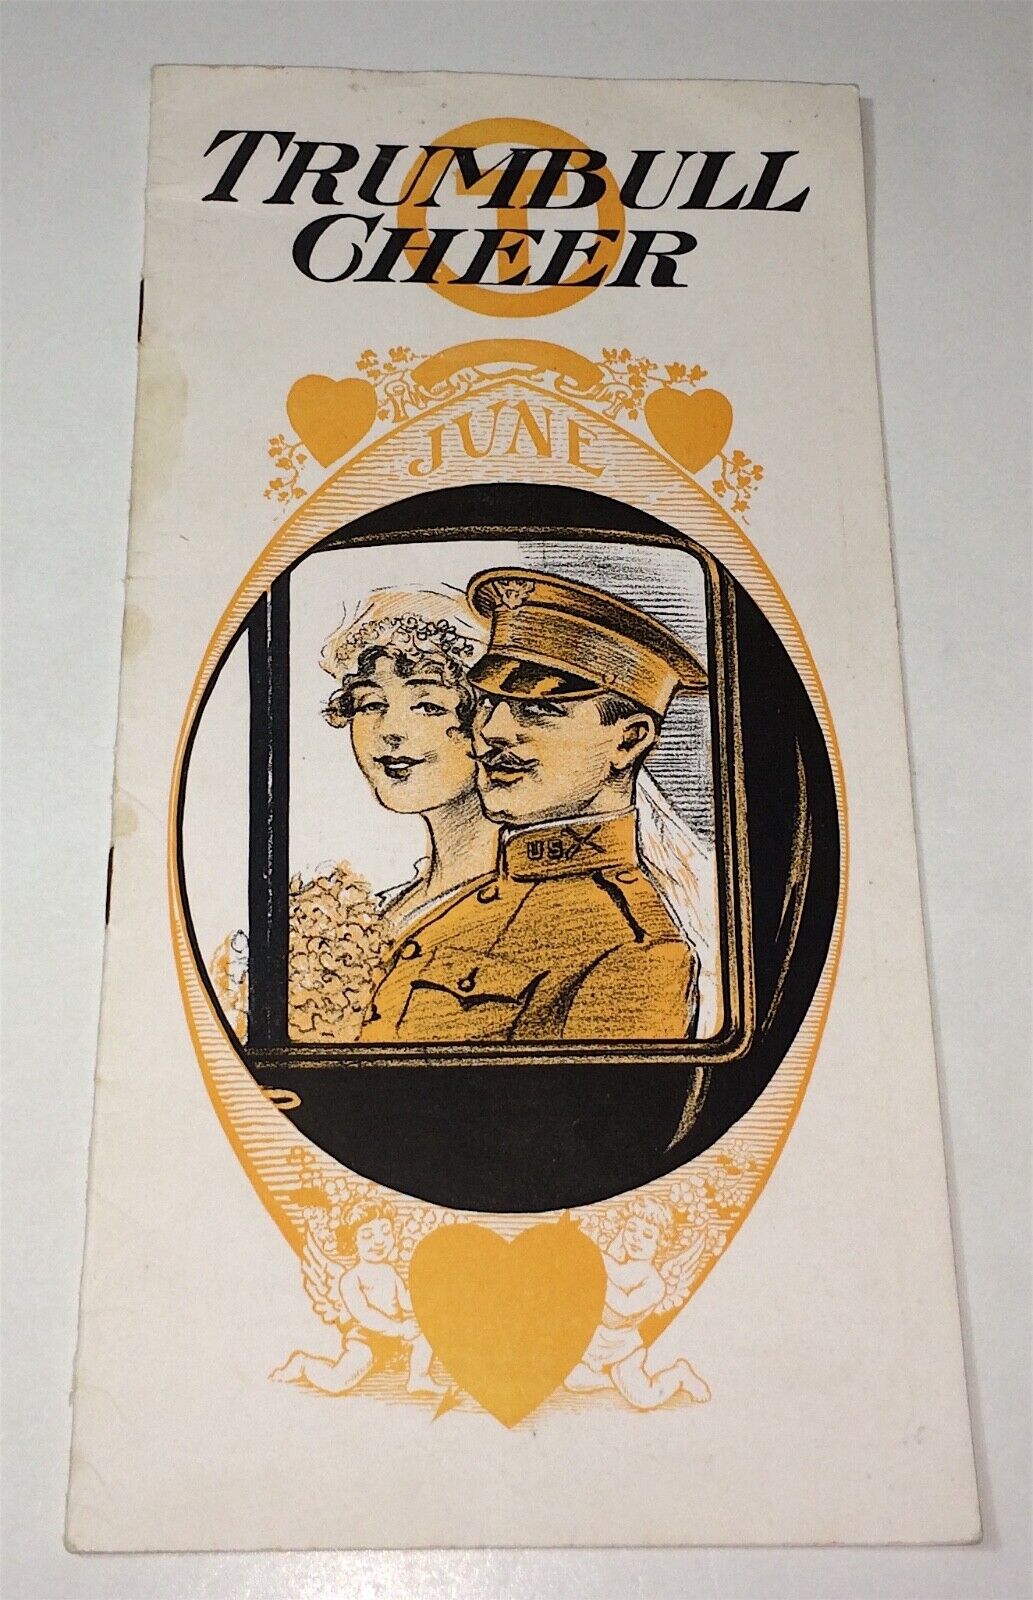 Rare American WWI Trumbull Electric Mfg Co. Factory Brochure Military 1918 US